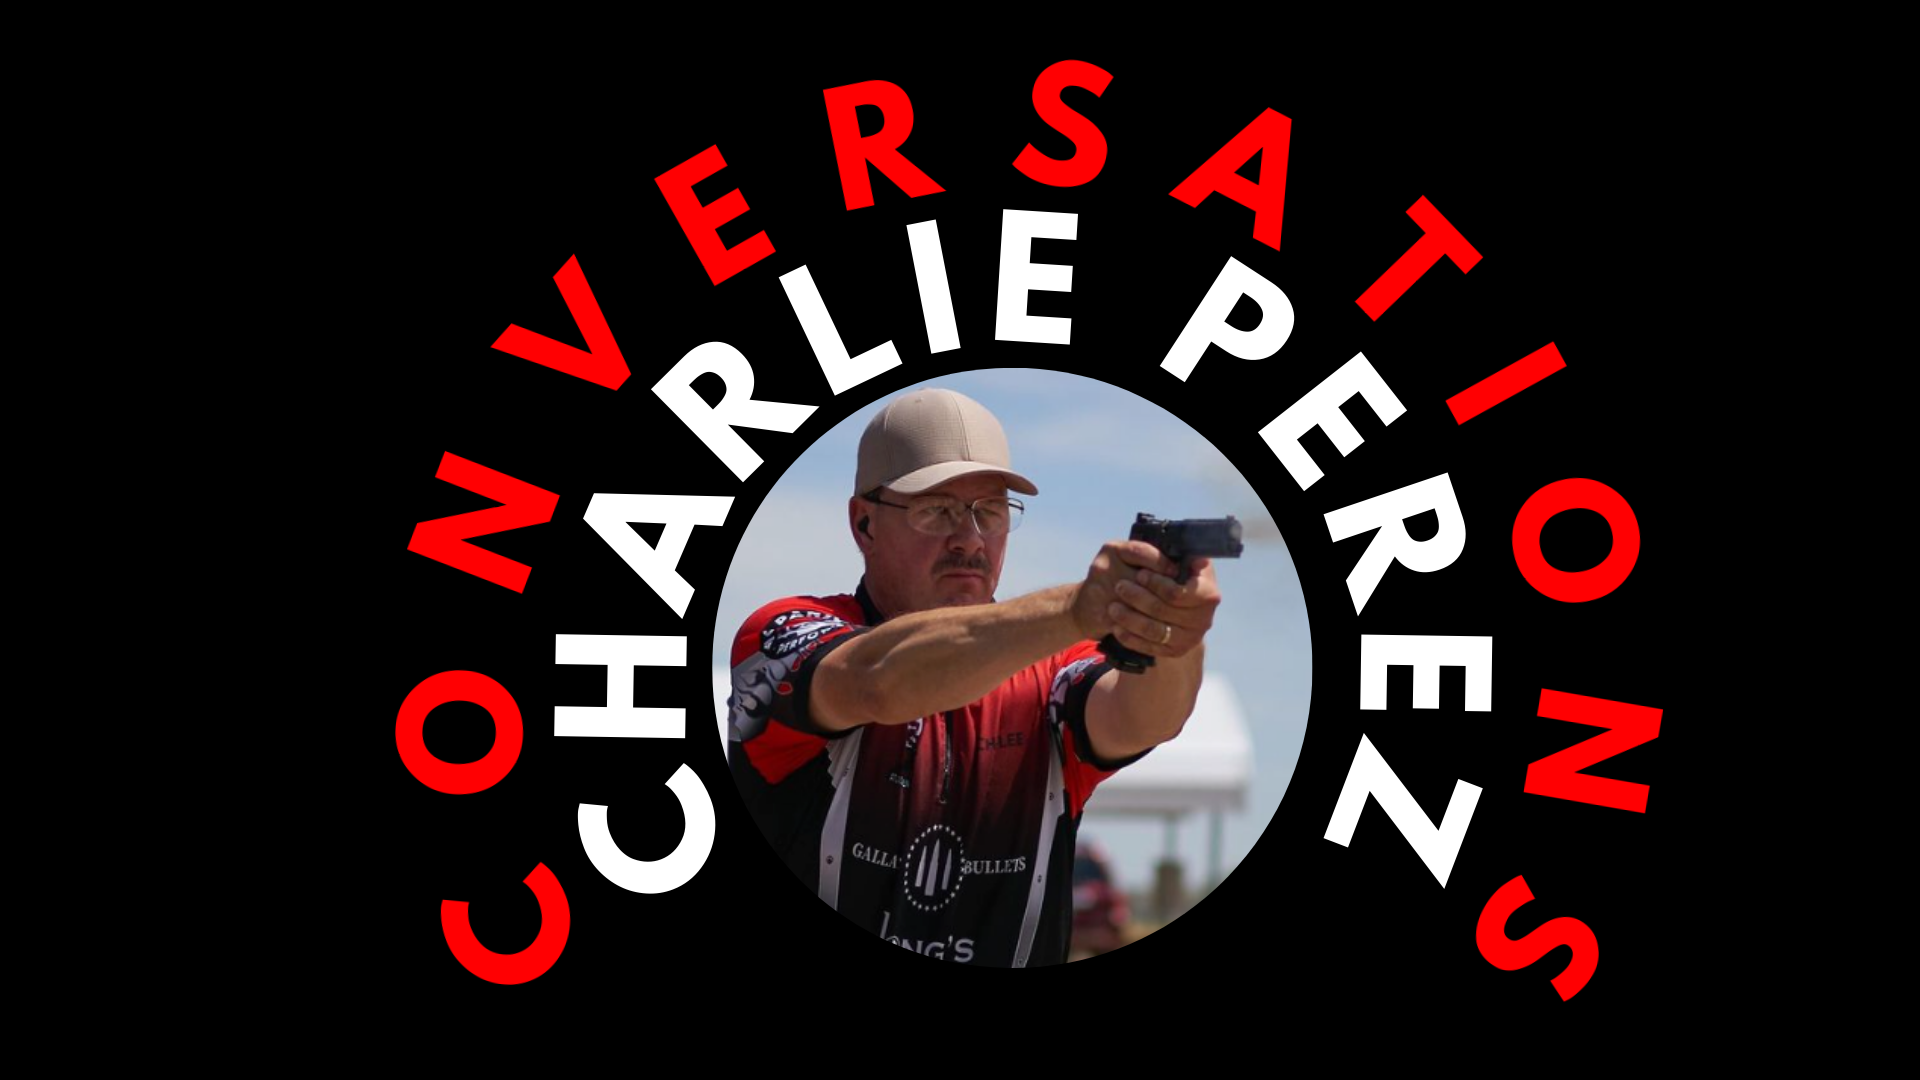 EP45: Charlie Perez from Unclassified to USPSA Grand Master in 18 months